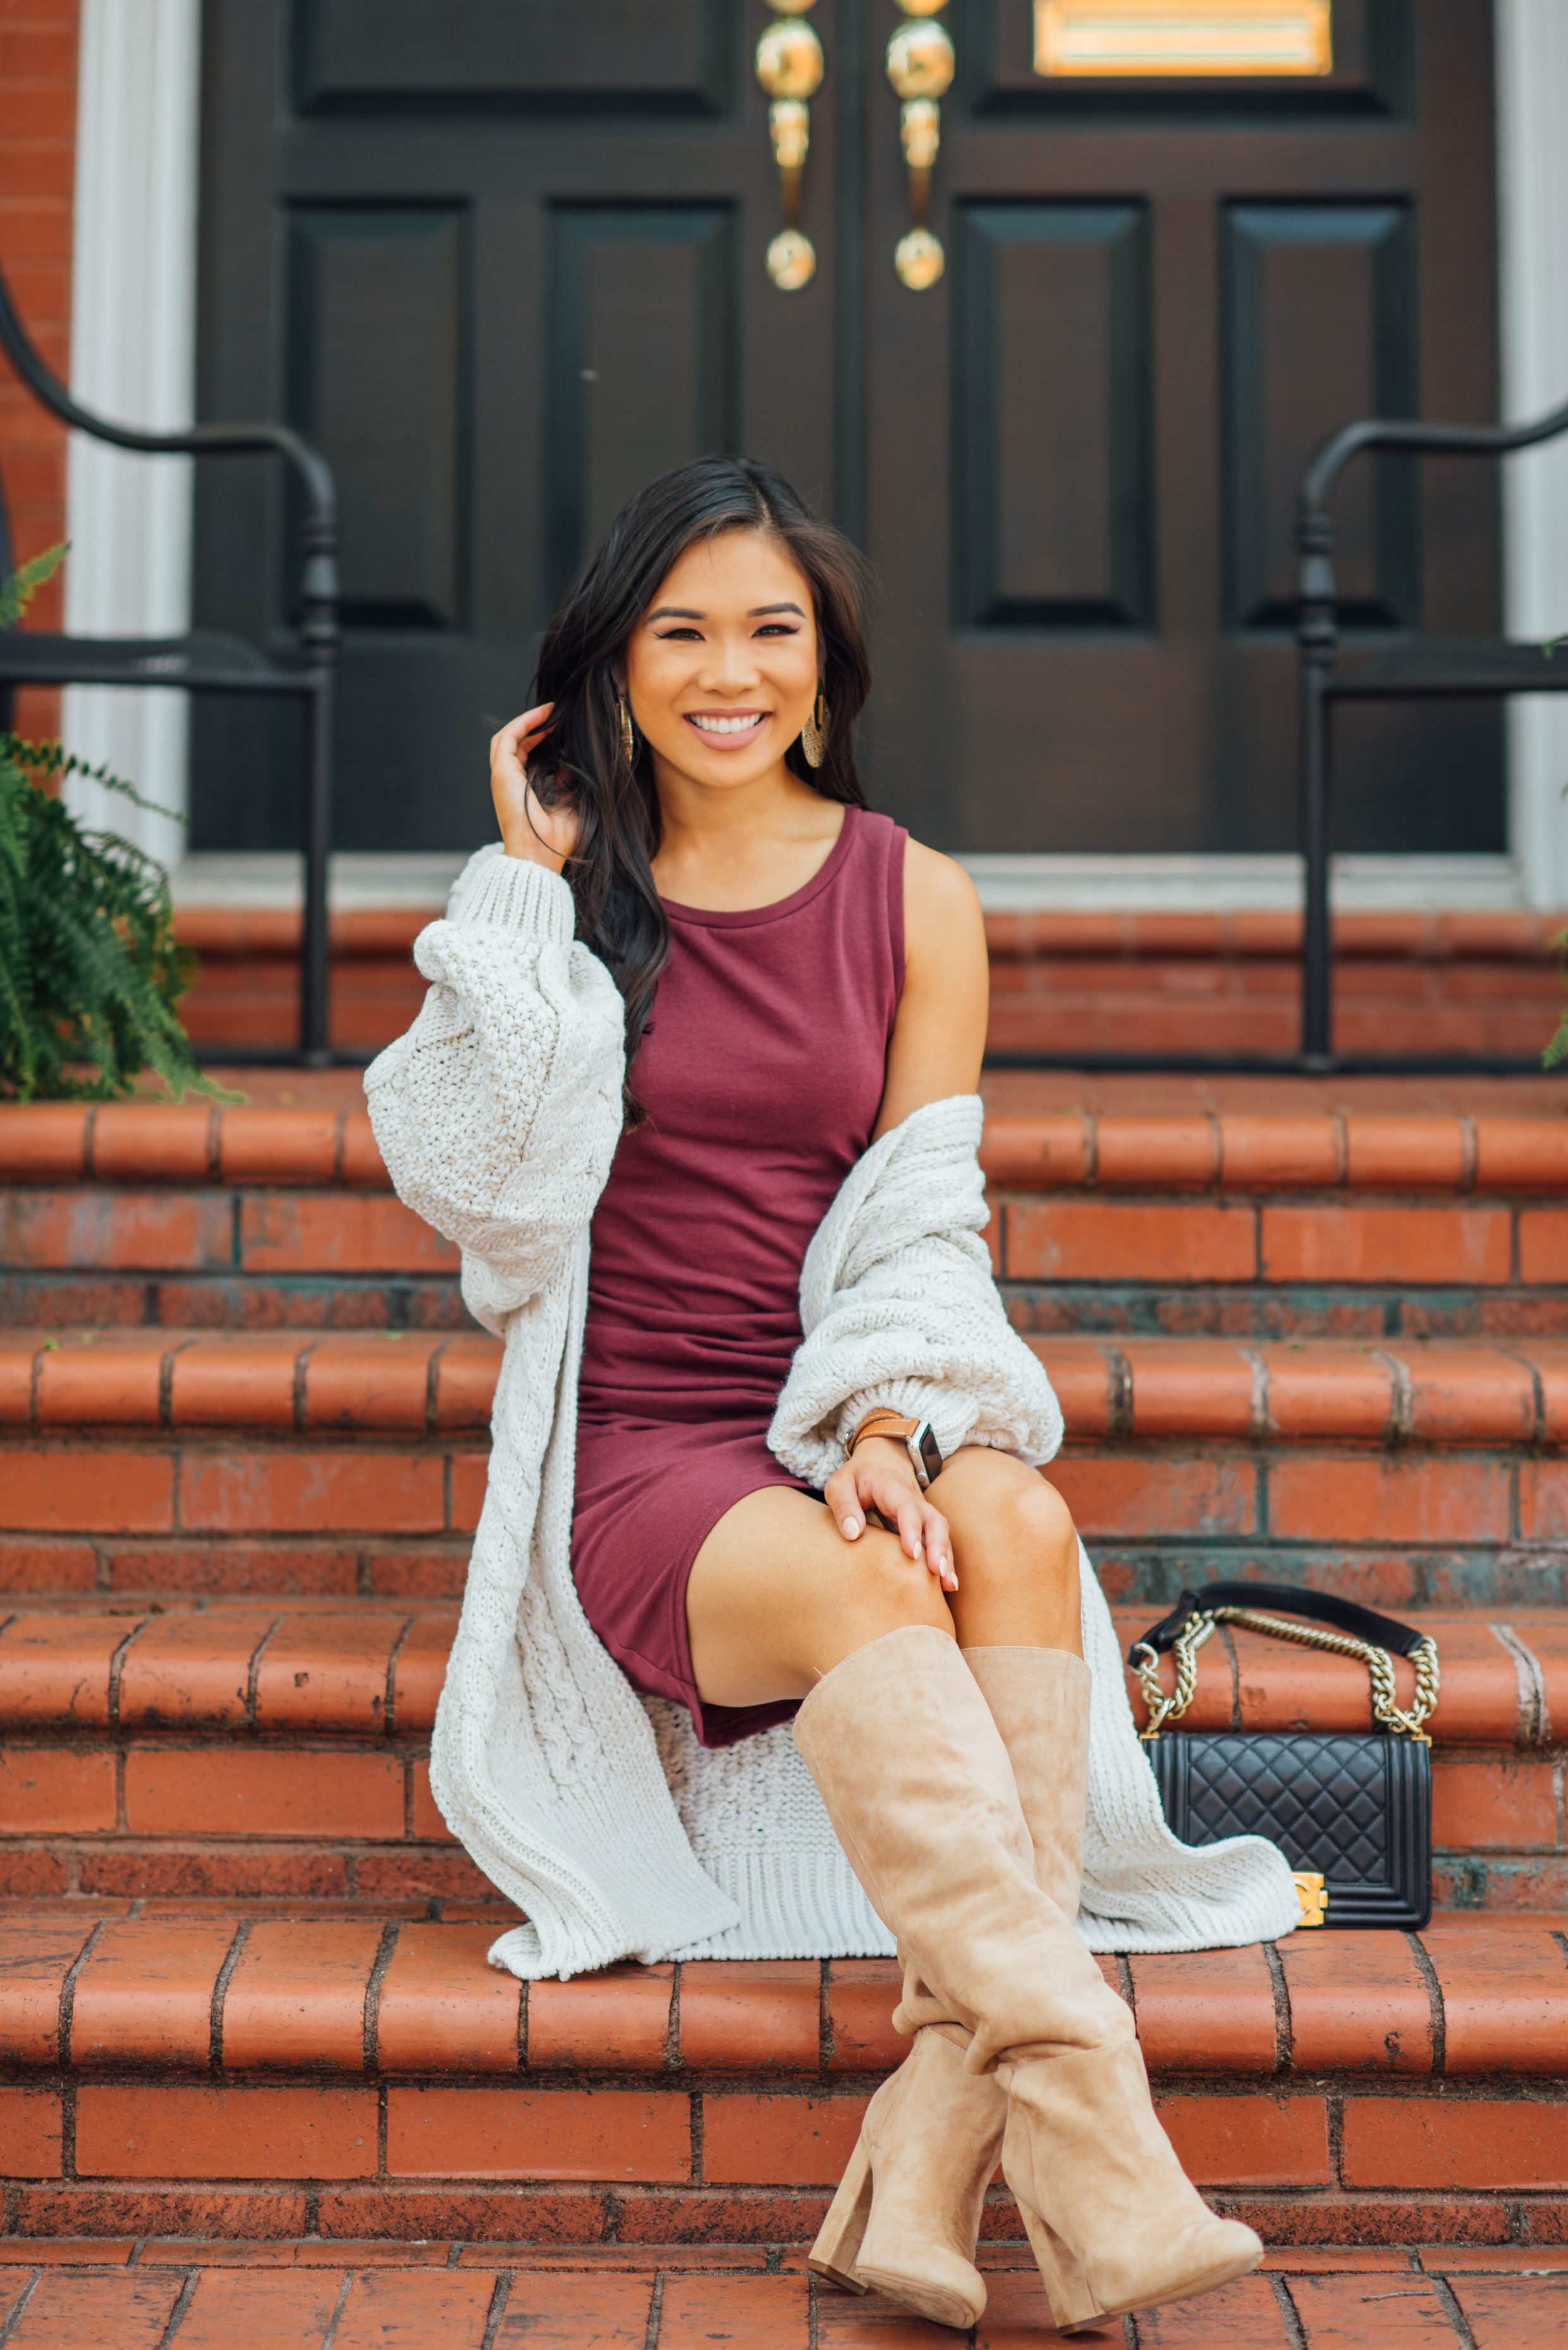 Fall style with a tank dress, oversized cardigan and boots